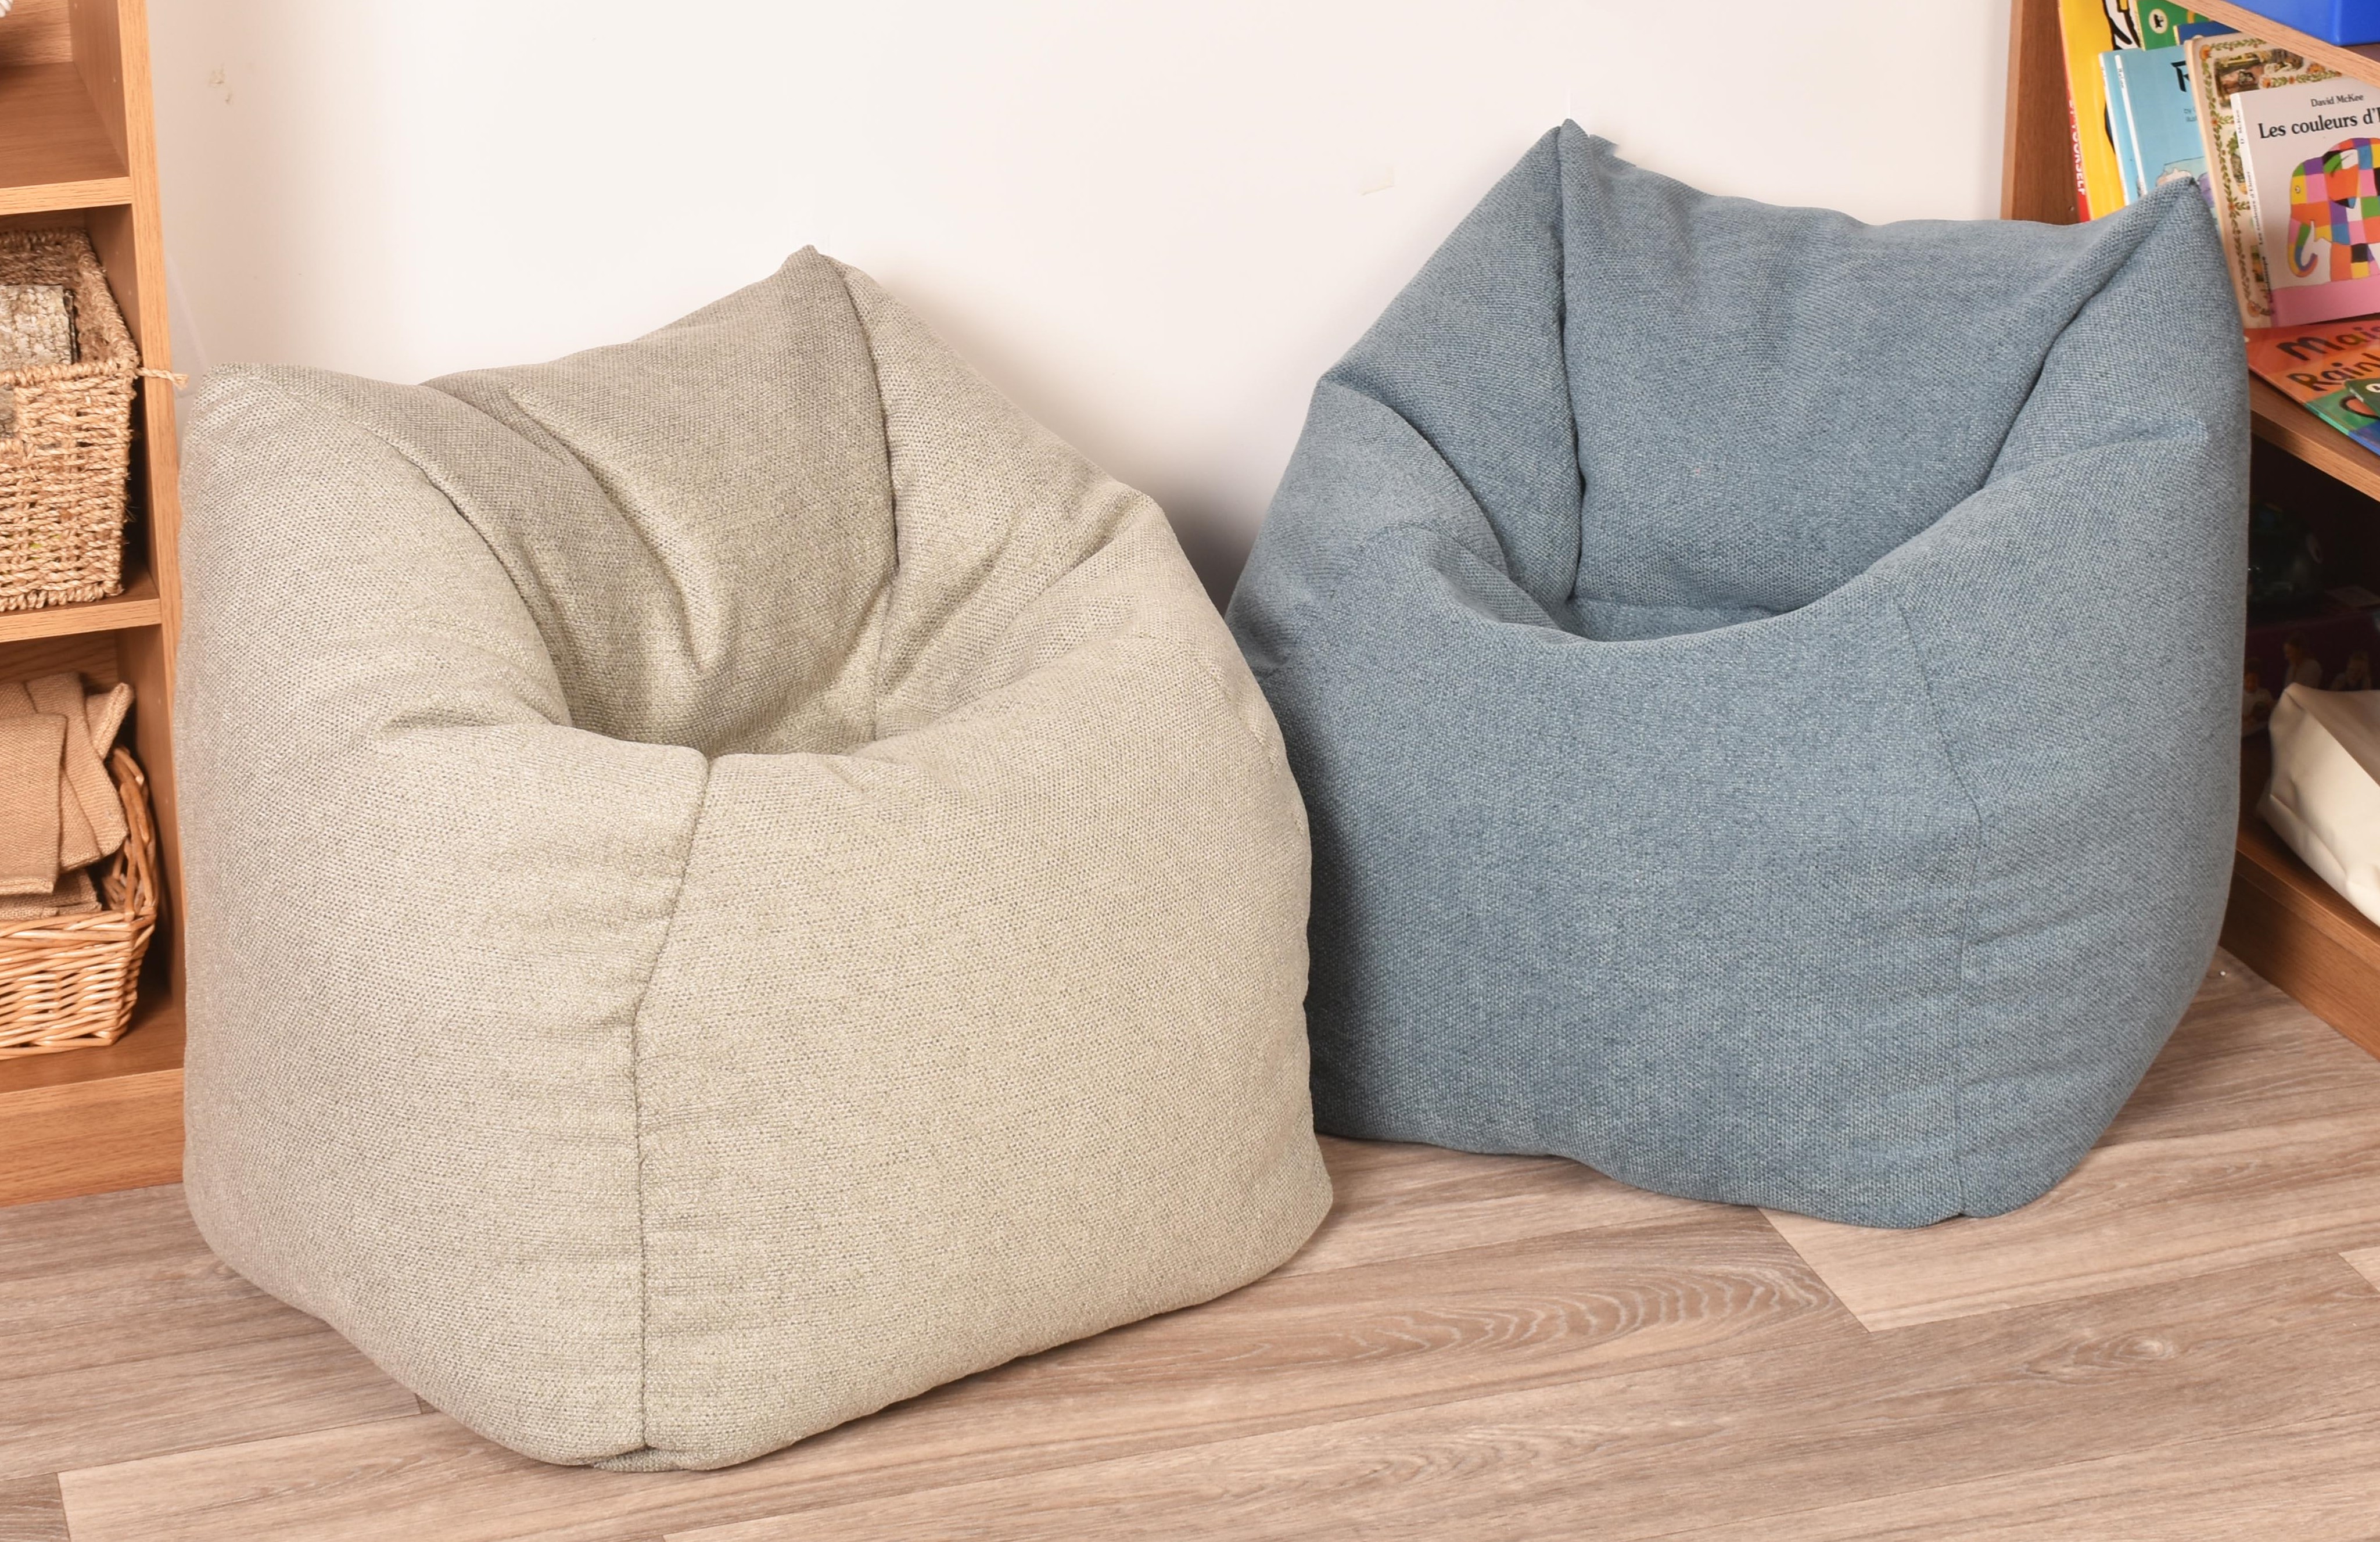 Primary Pouffe Chairs